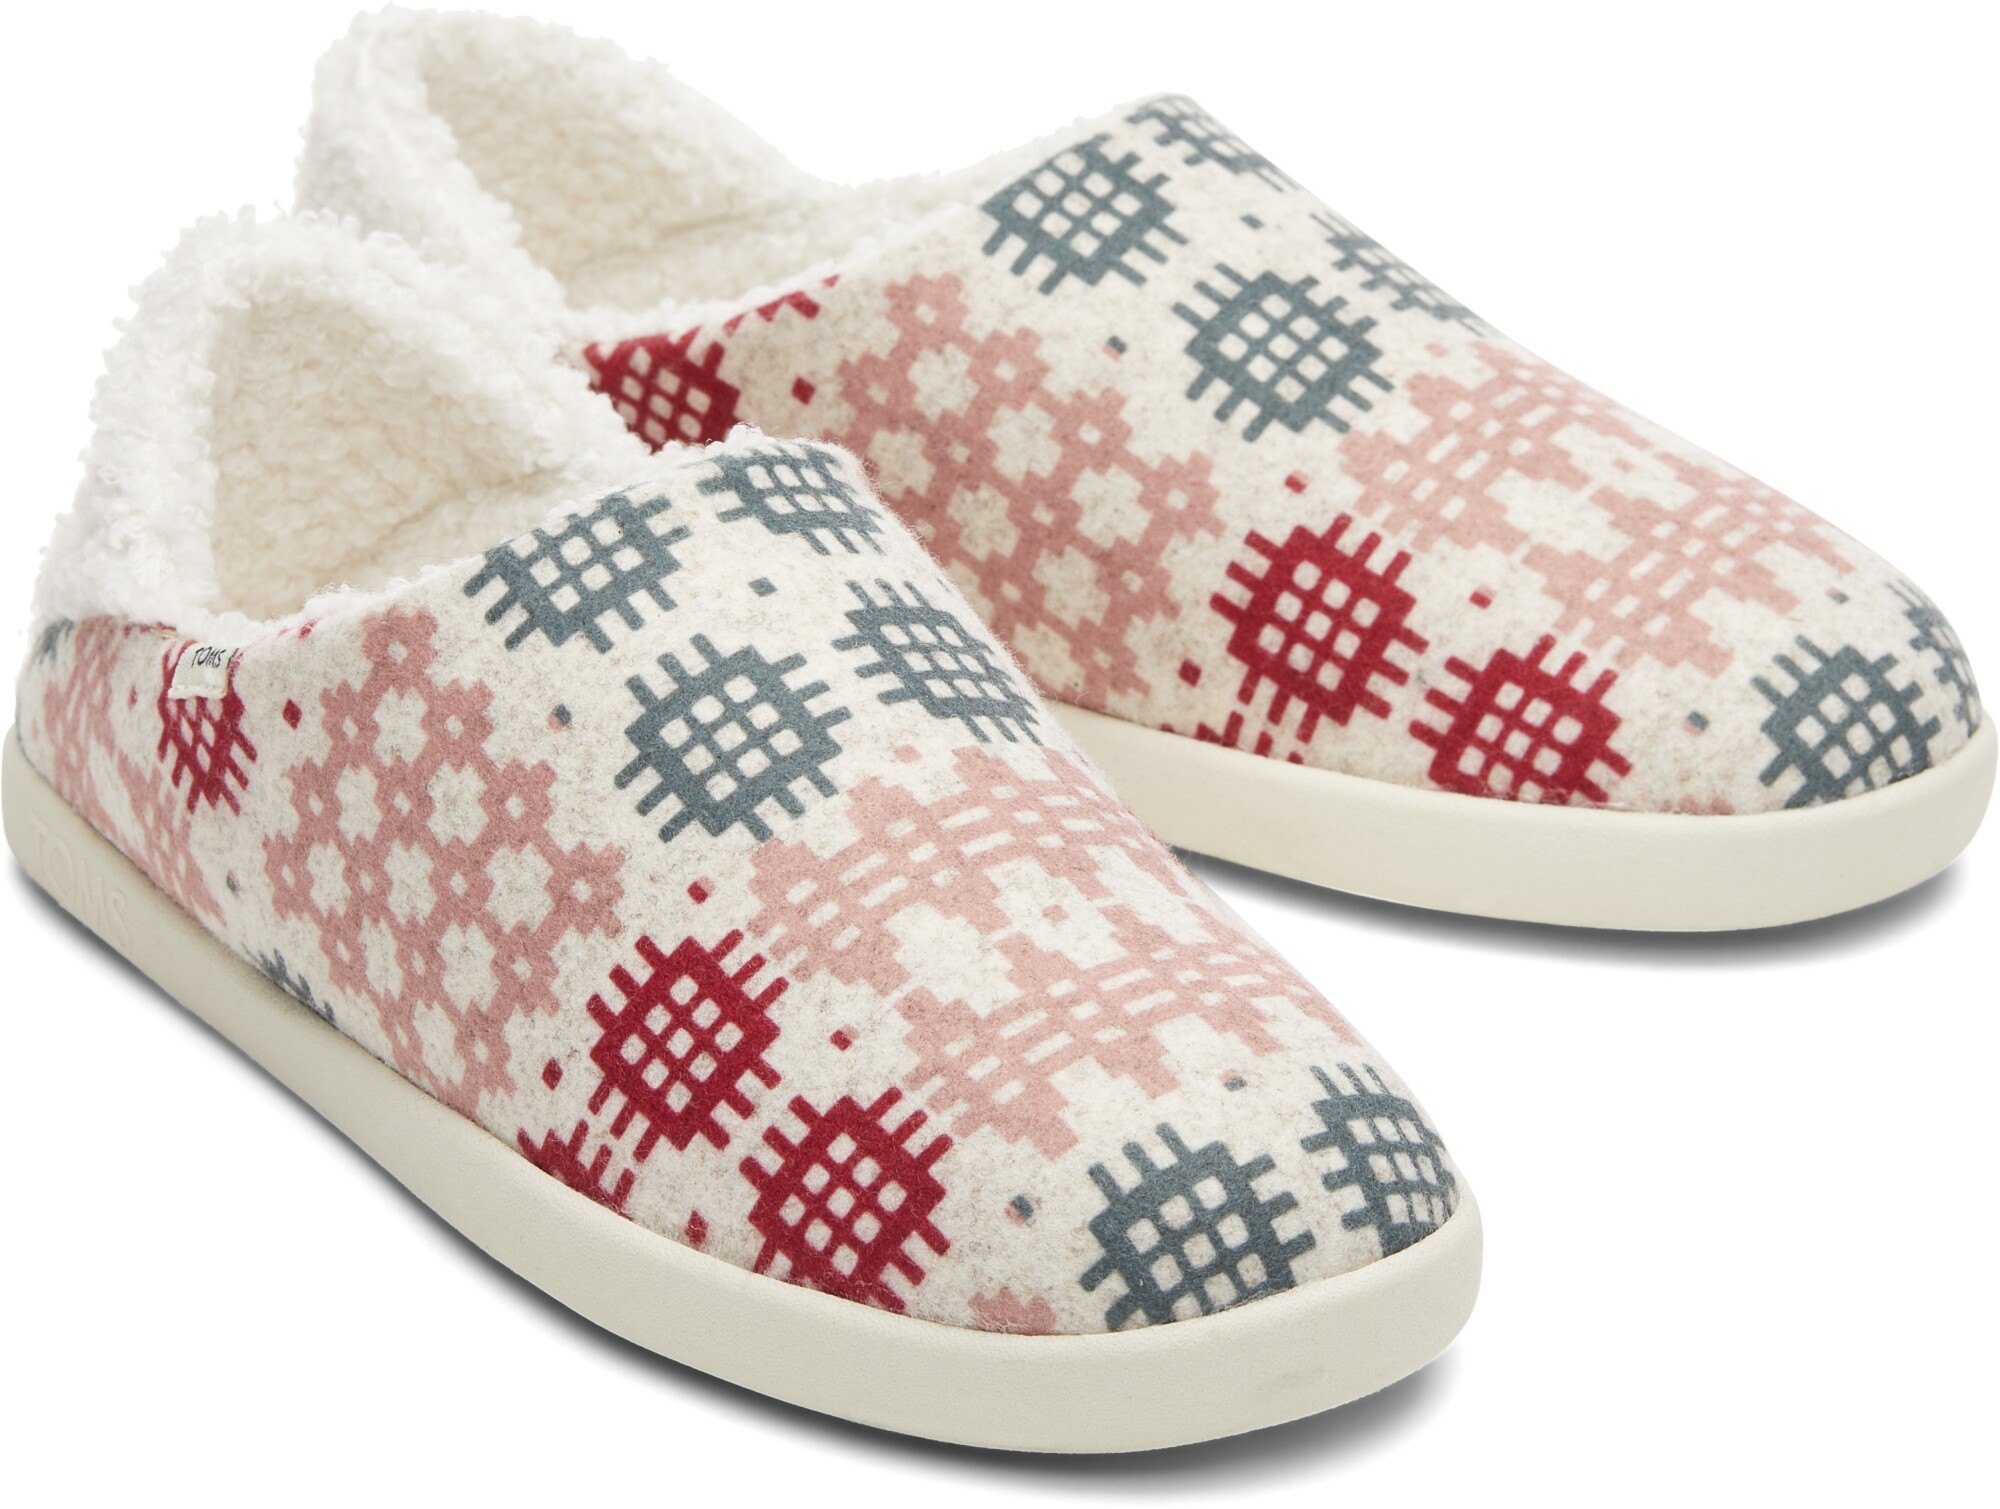 Fleece-lined slip-on shoes with a colorful pattern